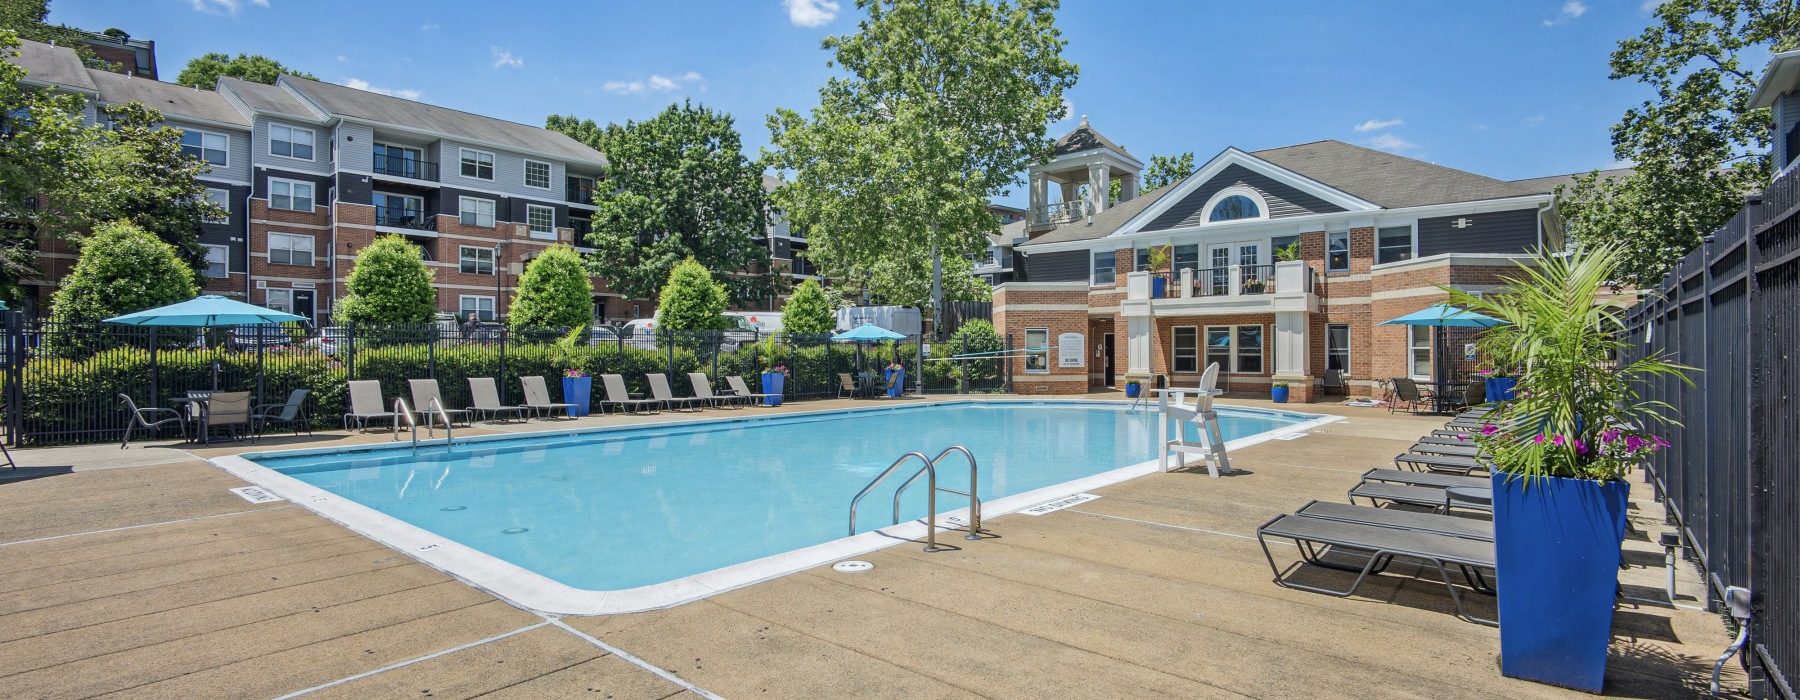 Pool with sundeck and clubhouse